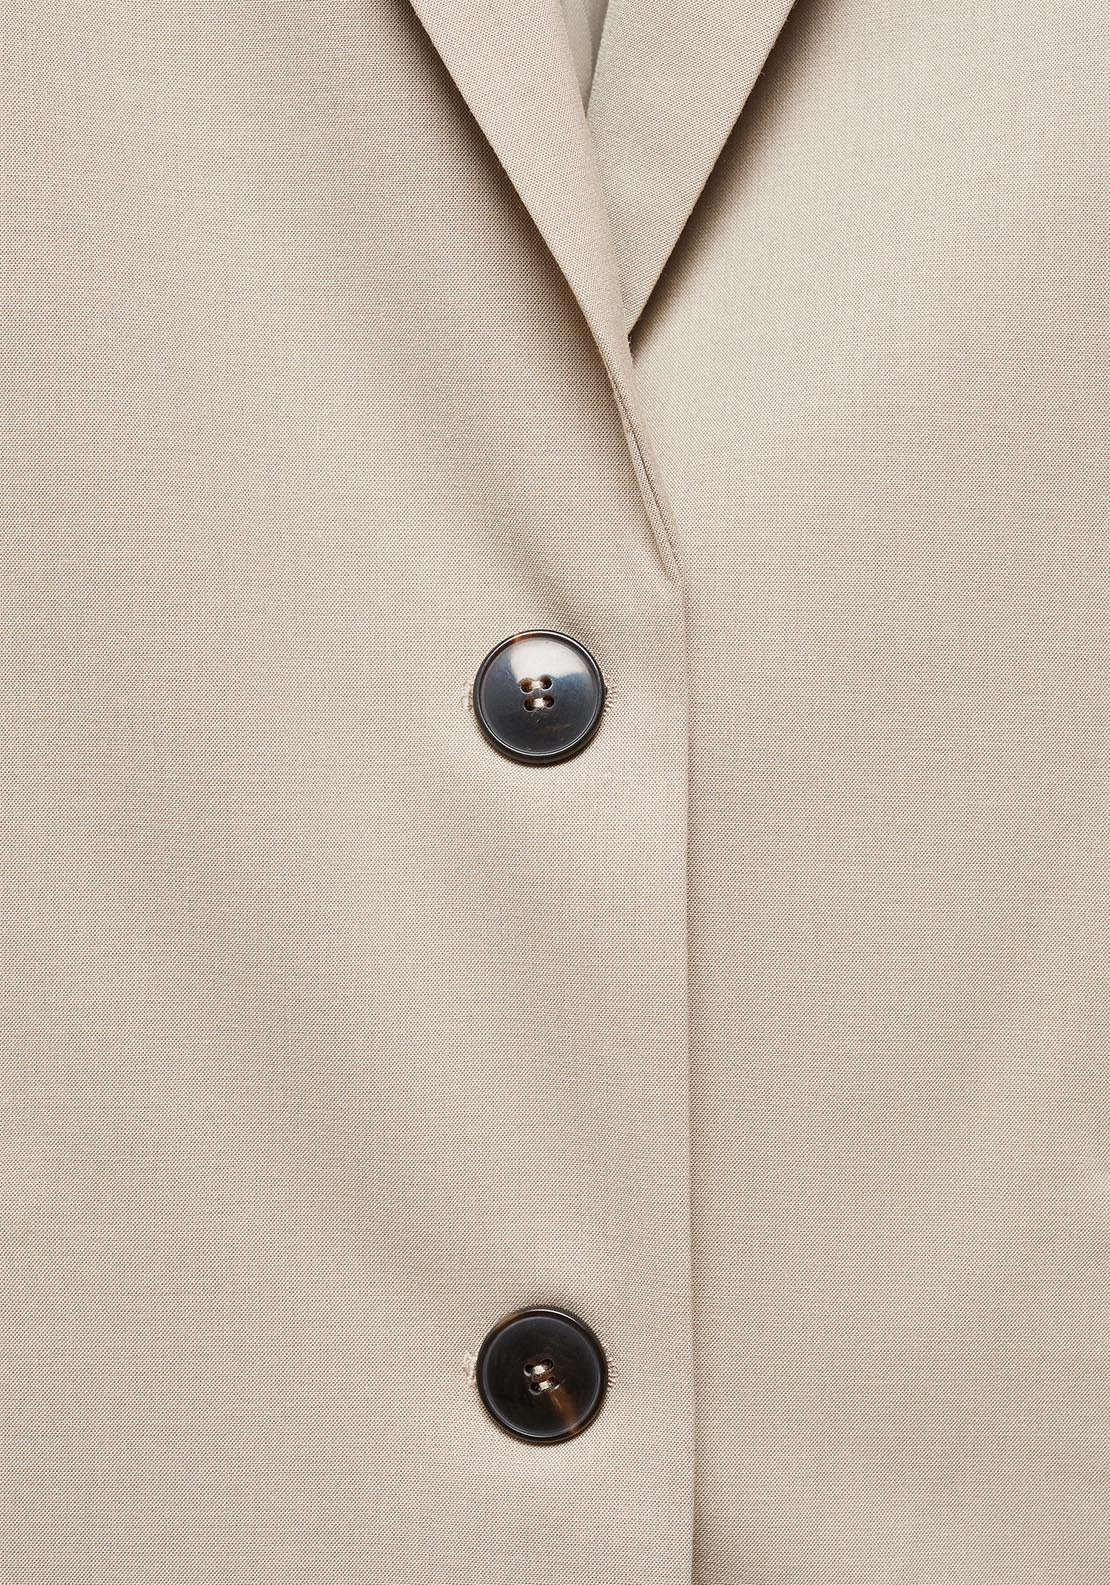 Mango Suit jacket with buttons 6 Shaws Department Stores